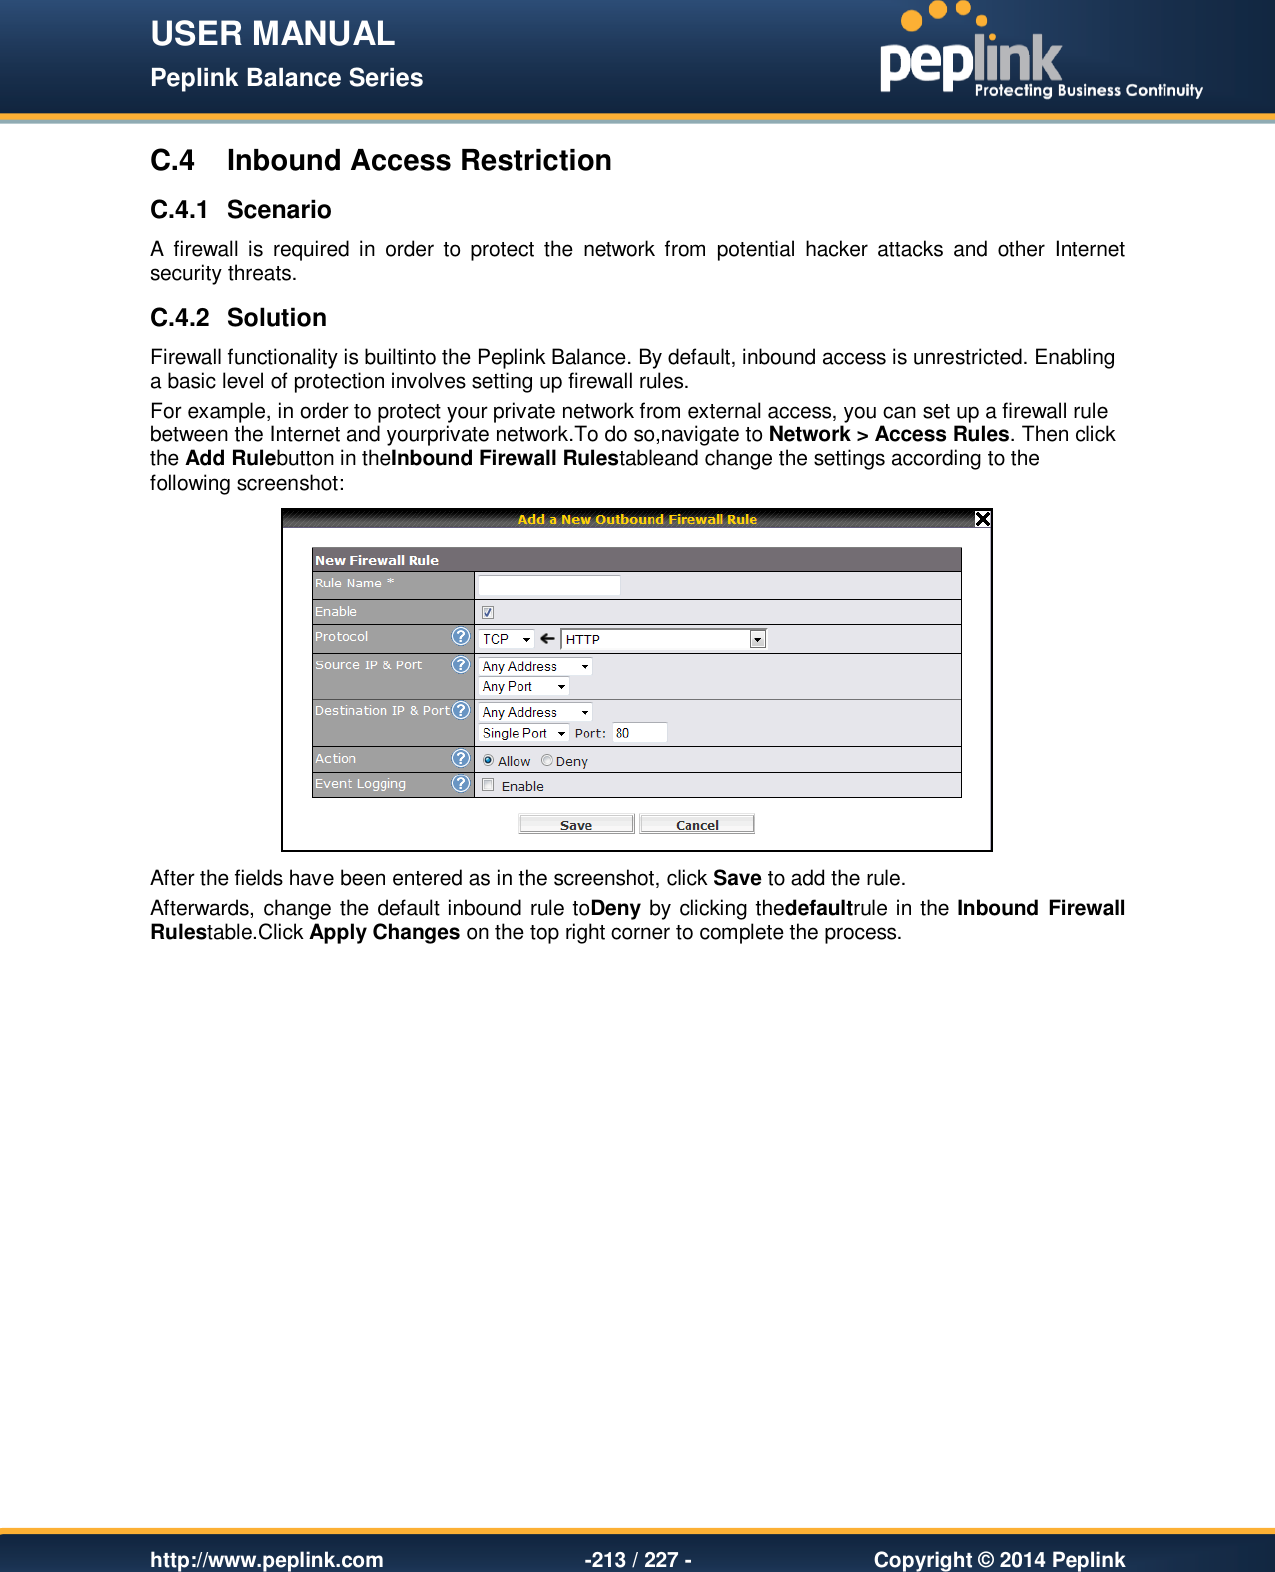 USER MANUAL Peplink Balance Series   http://www.peplink.com -213 / 227 -  Copyright © 2014 Peplink C.4  Inbound Access Restriction C.4.1  Scenario A  firewall  is  required in  order  to  protect  the  network  from  potential  hacker  attacks  and  other  Internet security threats.   C.4.2  Solution Firewall functionality is builtinto the Peplink Balance. By default, inbound access is unrestricted. Enabling a basic level of protection involves setting up firewall rules.   For example, in order to protect your private network from external access, you can set up a firewall rule between the Internet and yourprivate network.To do so,navigate to Network &gt; Access Rules. Then click the Add Rulebutton in theInbound Firewall Rulestableand change the settings according to the following screenshot:  After the fields have been entered as in the screenshot, click Save to add the rule.  Afterwards, change the default inbound rule toDeny by clicking thedefaultrule in the Inbound Firewall Rulestable.Click Apply Changes on the top right corner to complete the process.  